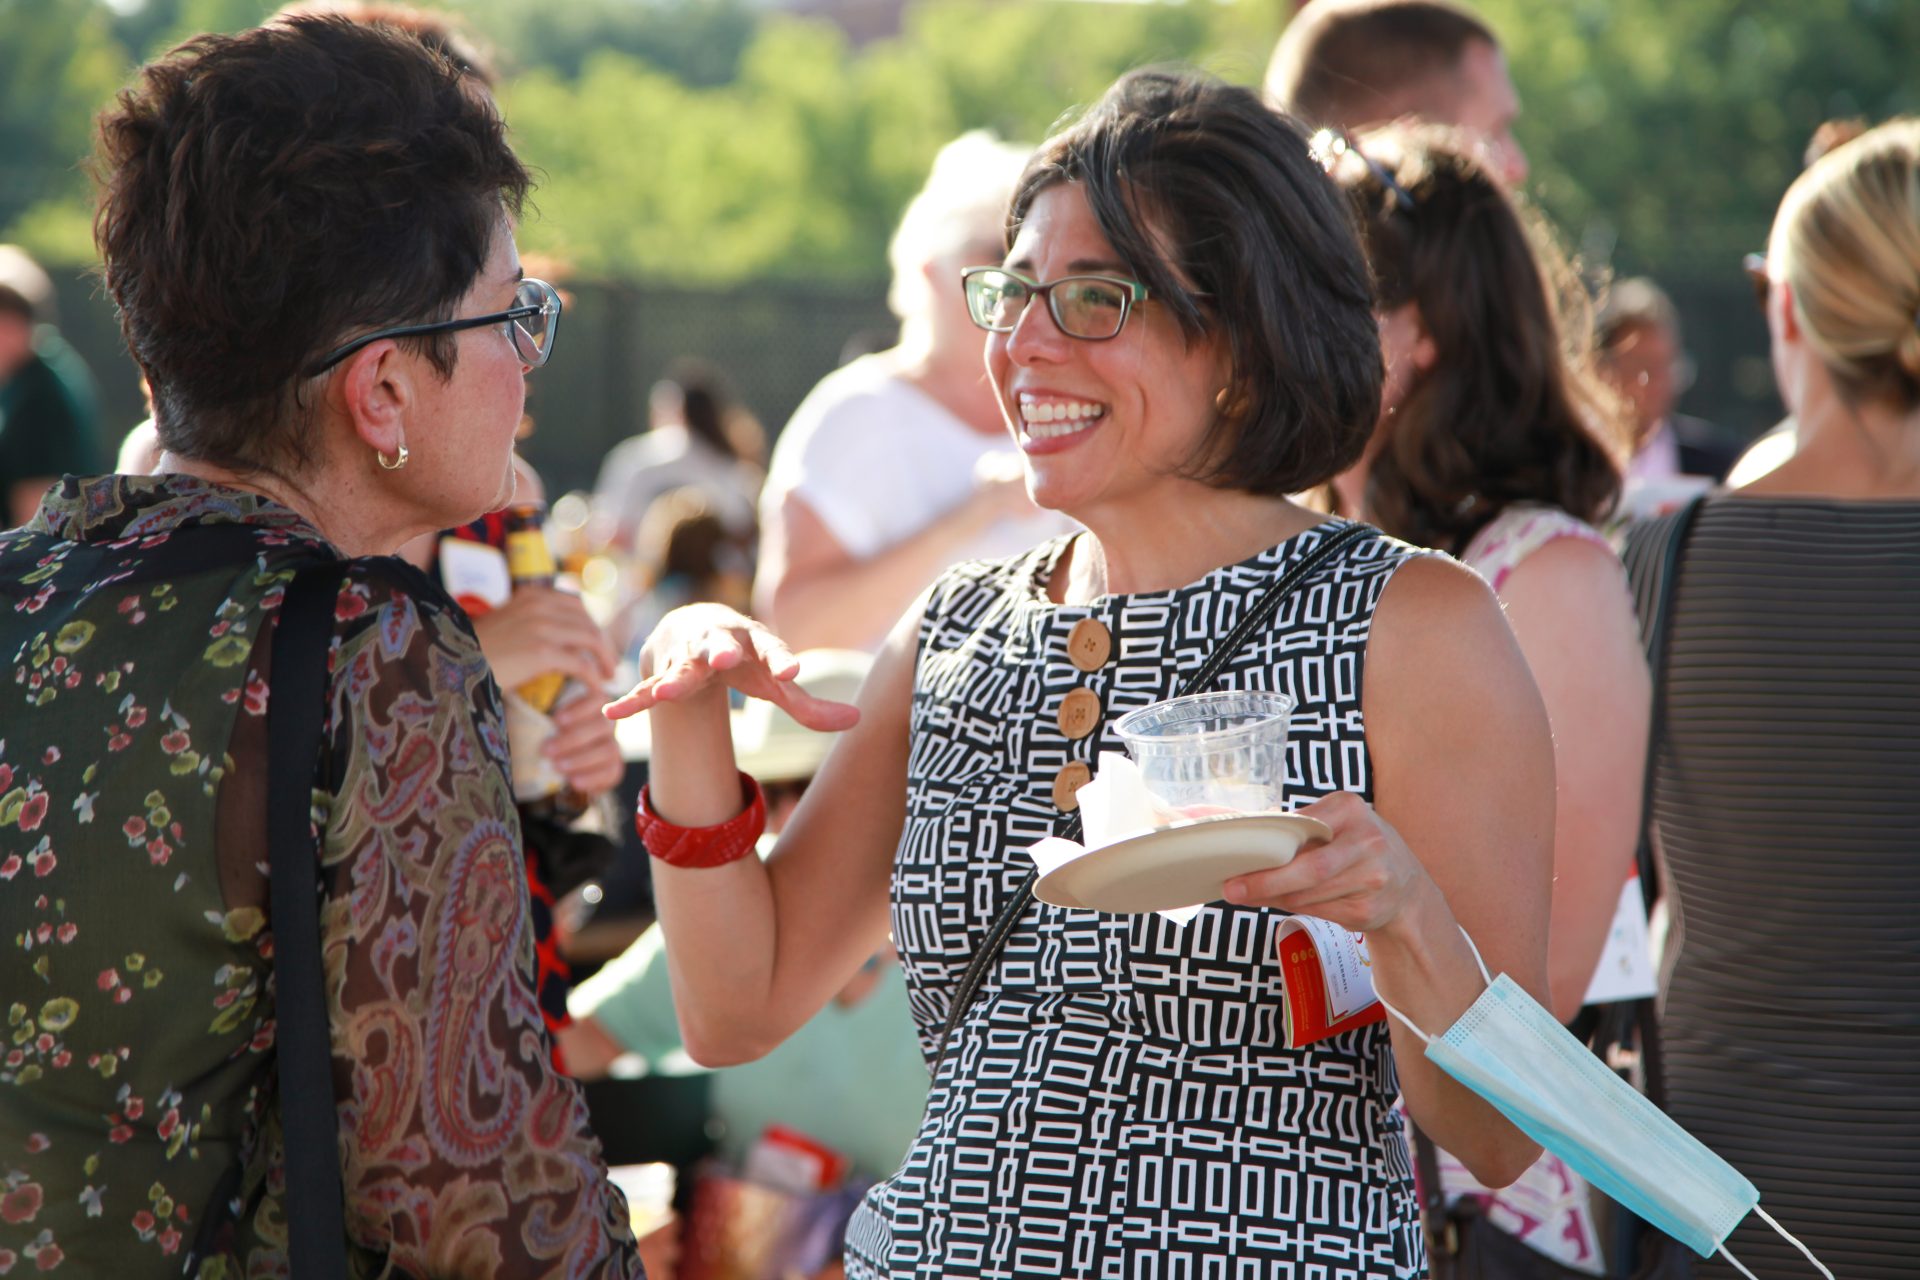 Two women smile at each other, chatting during the event